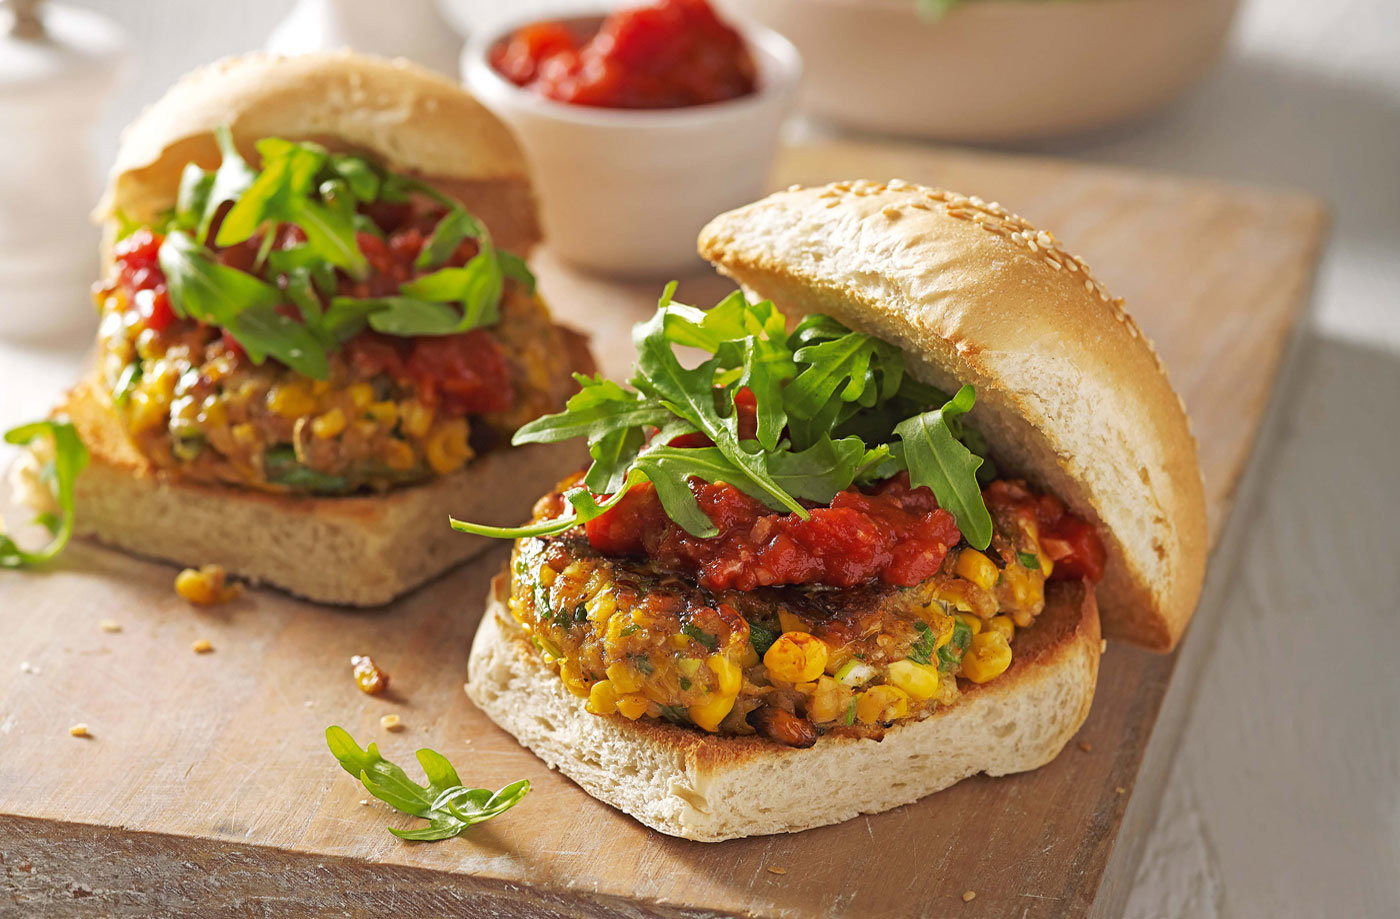 Vegan Chickpea Burgers Recipes
 Sweetcorn and chickpea burgers with smoky tomato sauce